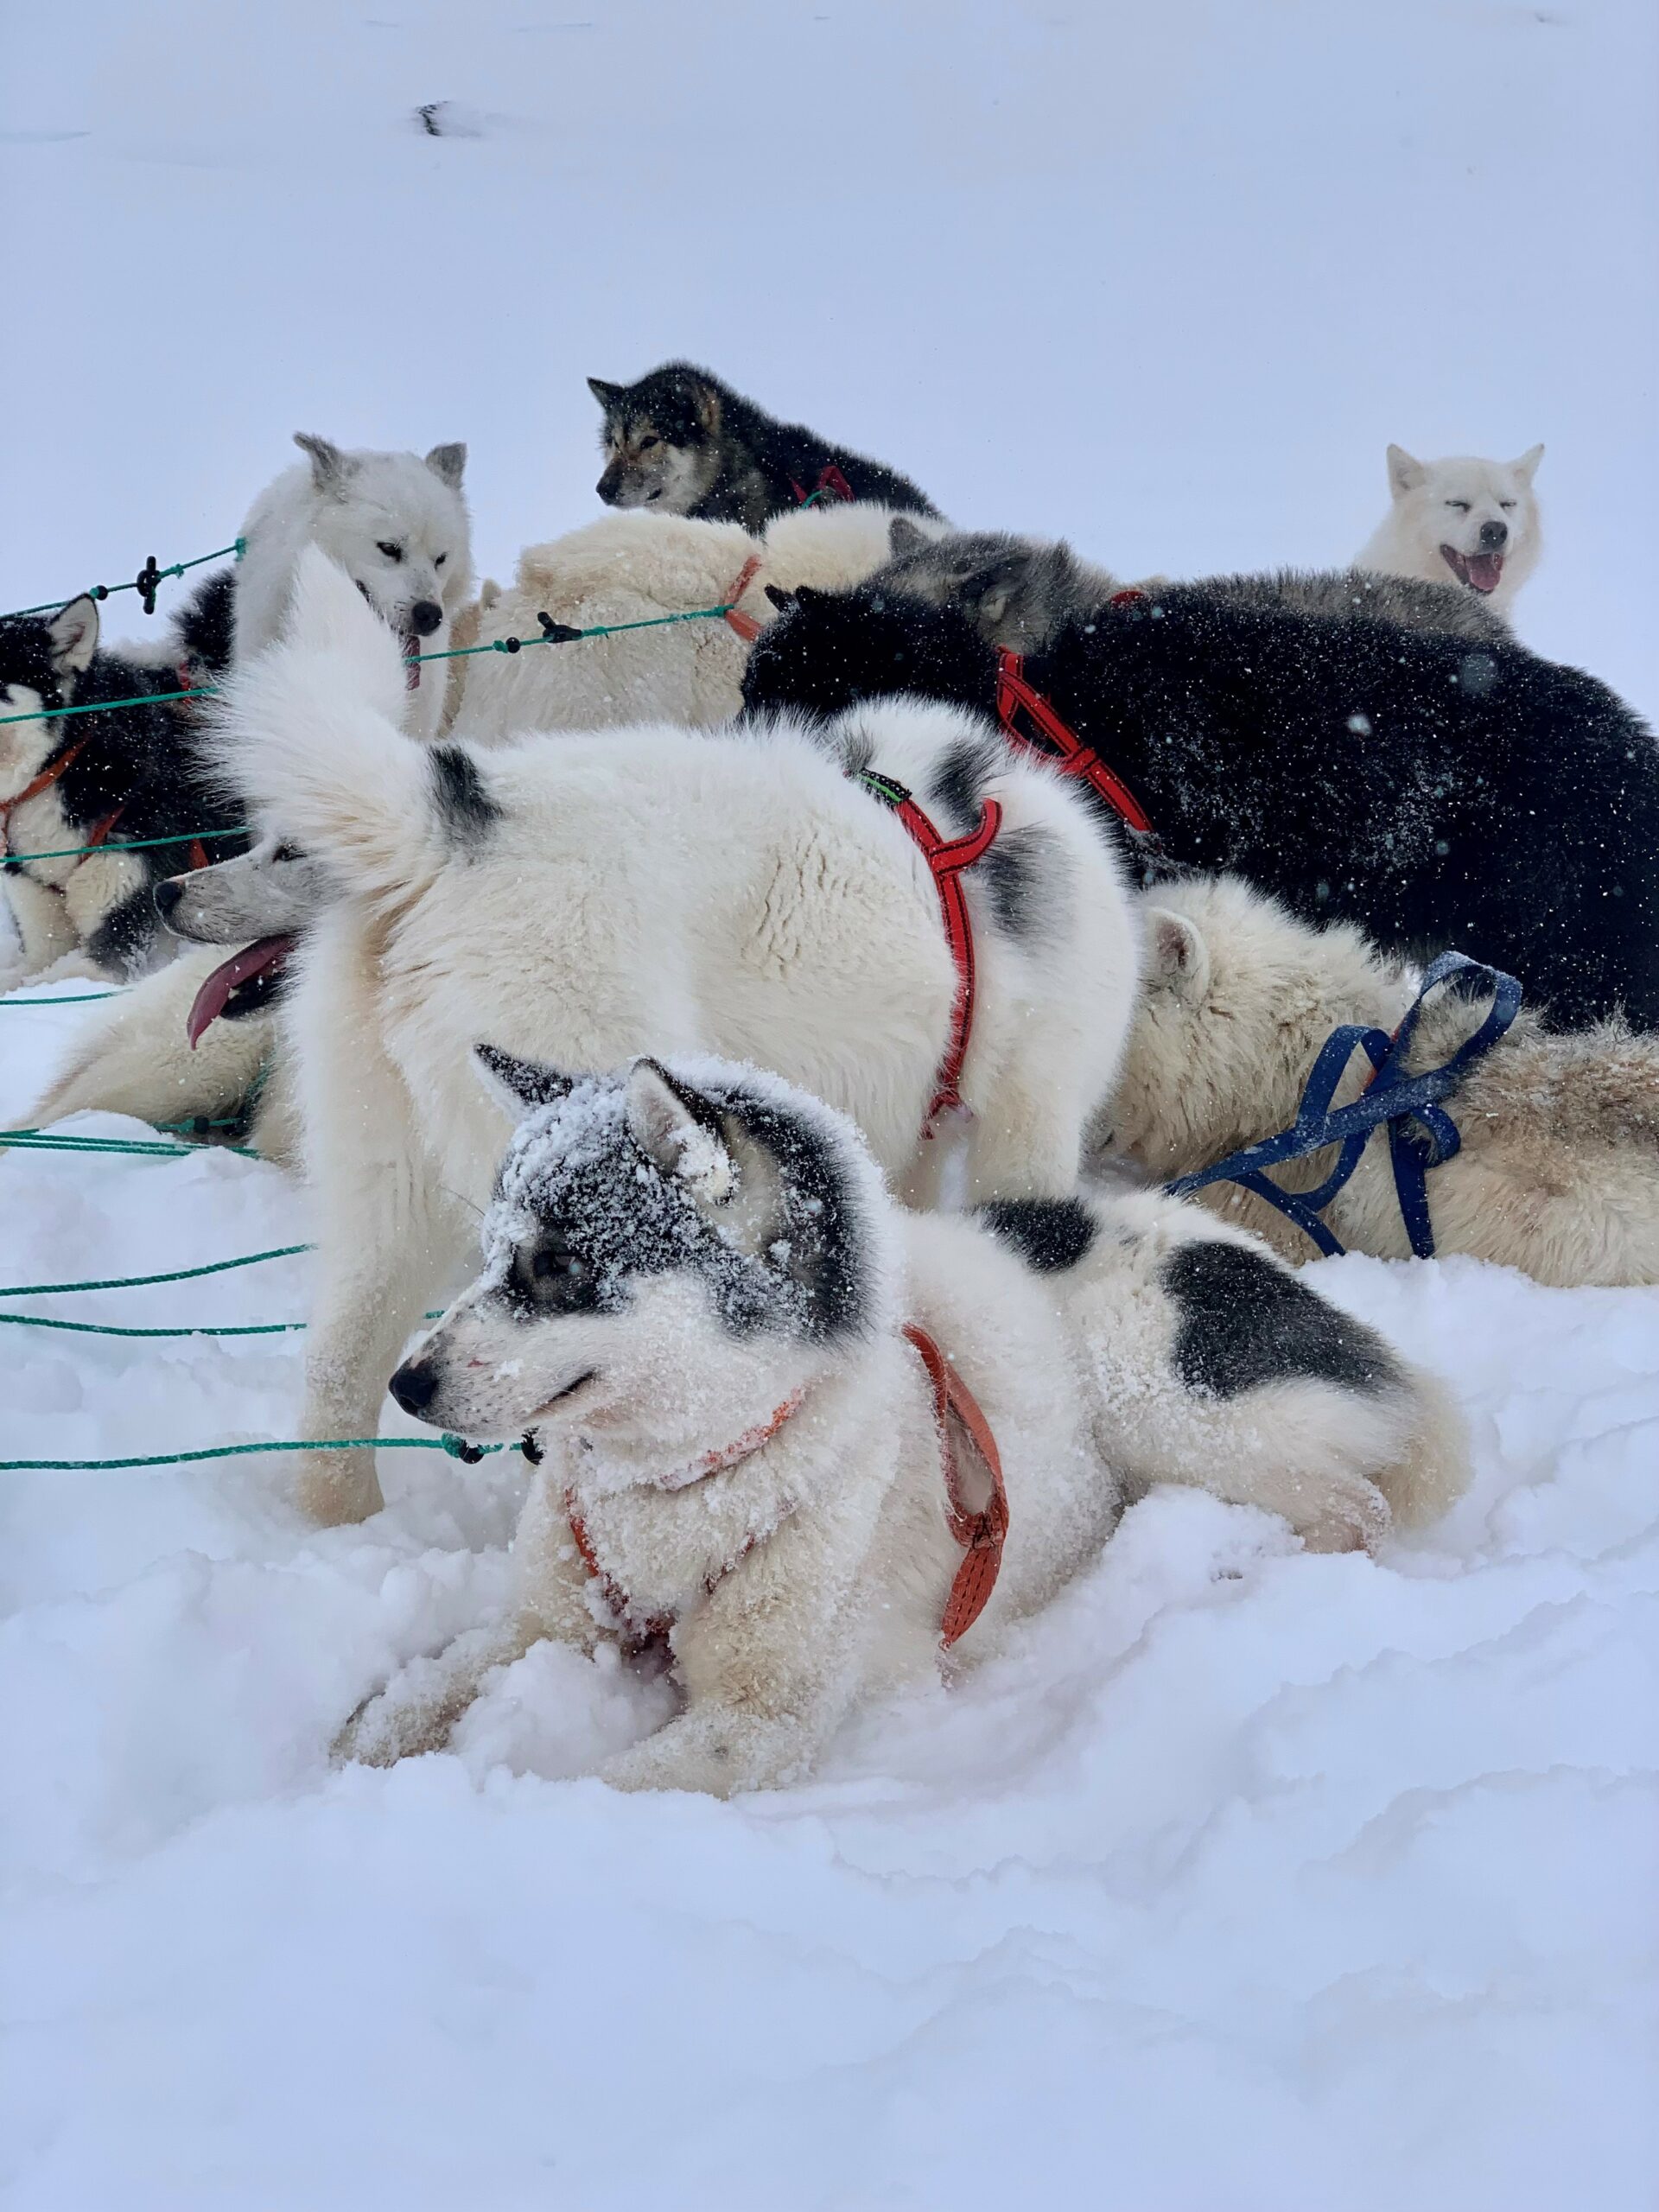 dog sled excursions & tours